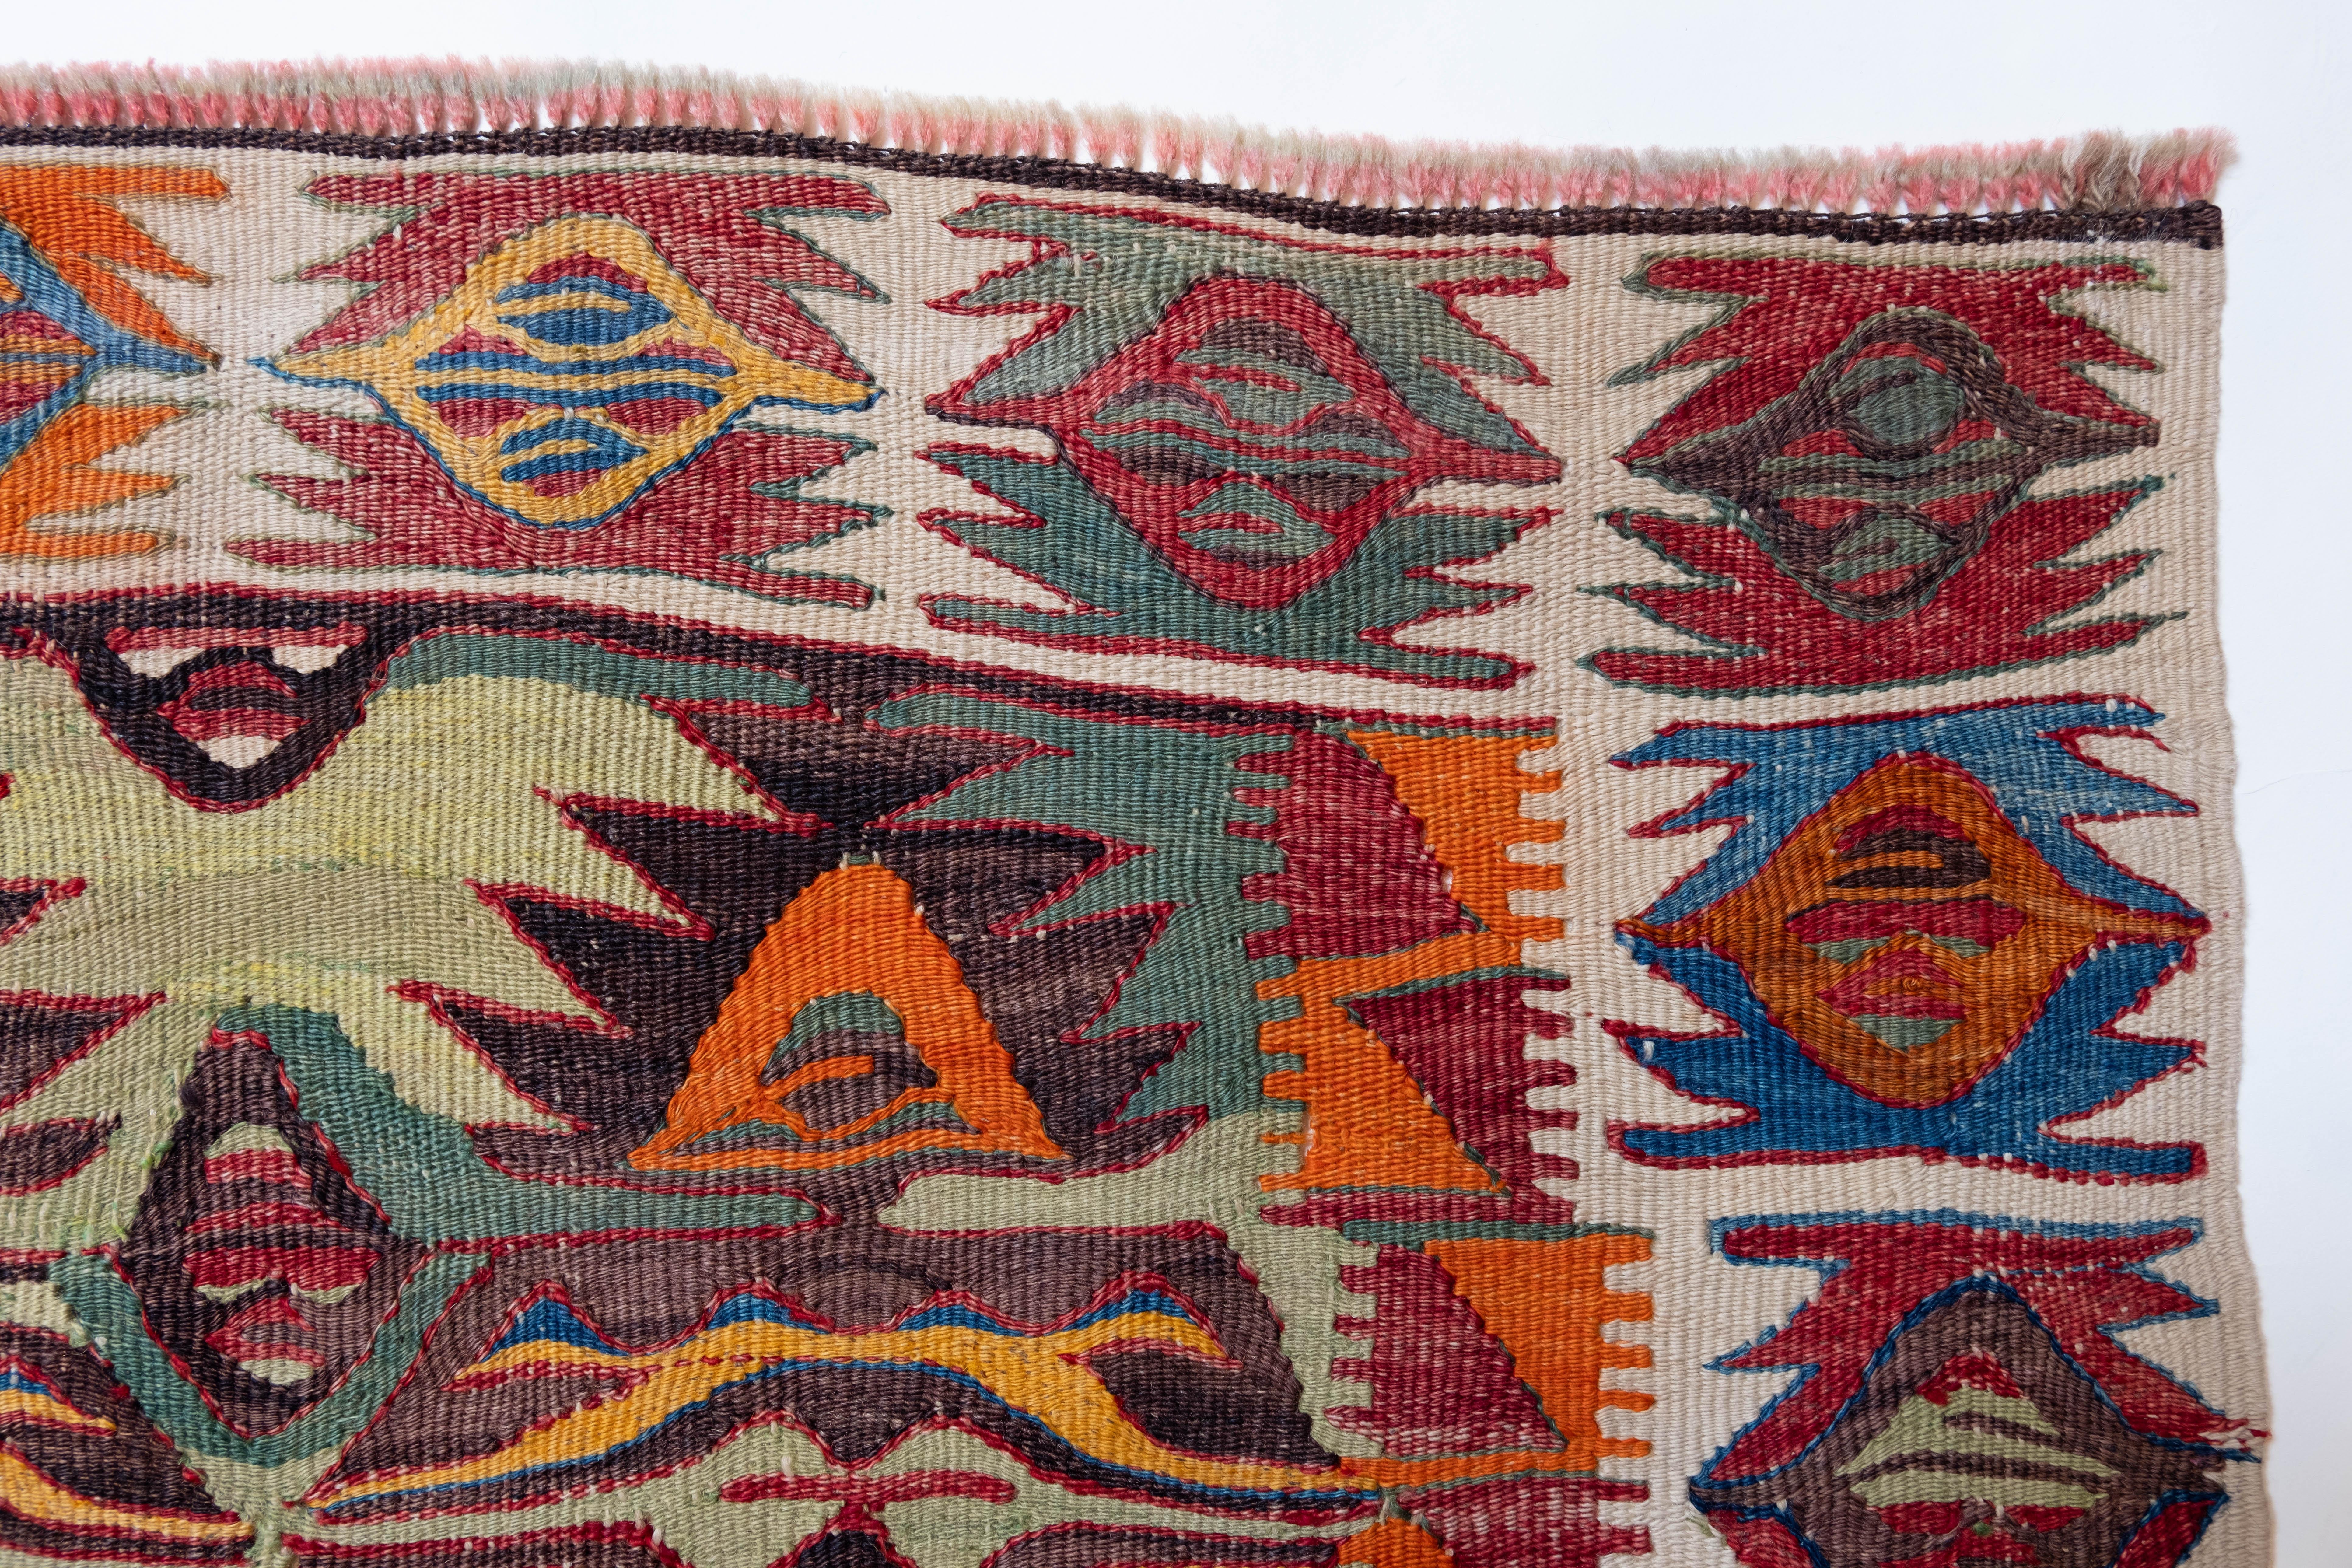 This is Central Anatolian Antique Kilim from the Hotamis, Konya region with a rare and beautiful color composition.

This highly collectible antique kilim has wonderful special colors and textures that are typical of an old kilim in good condition.